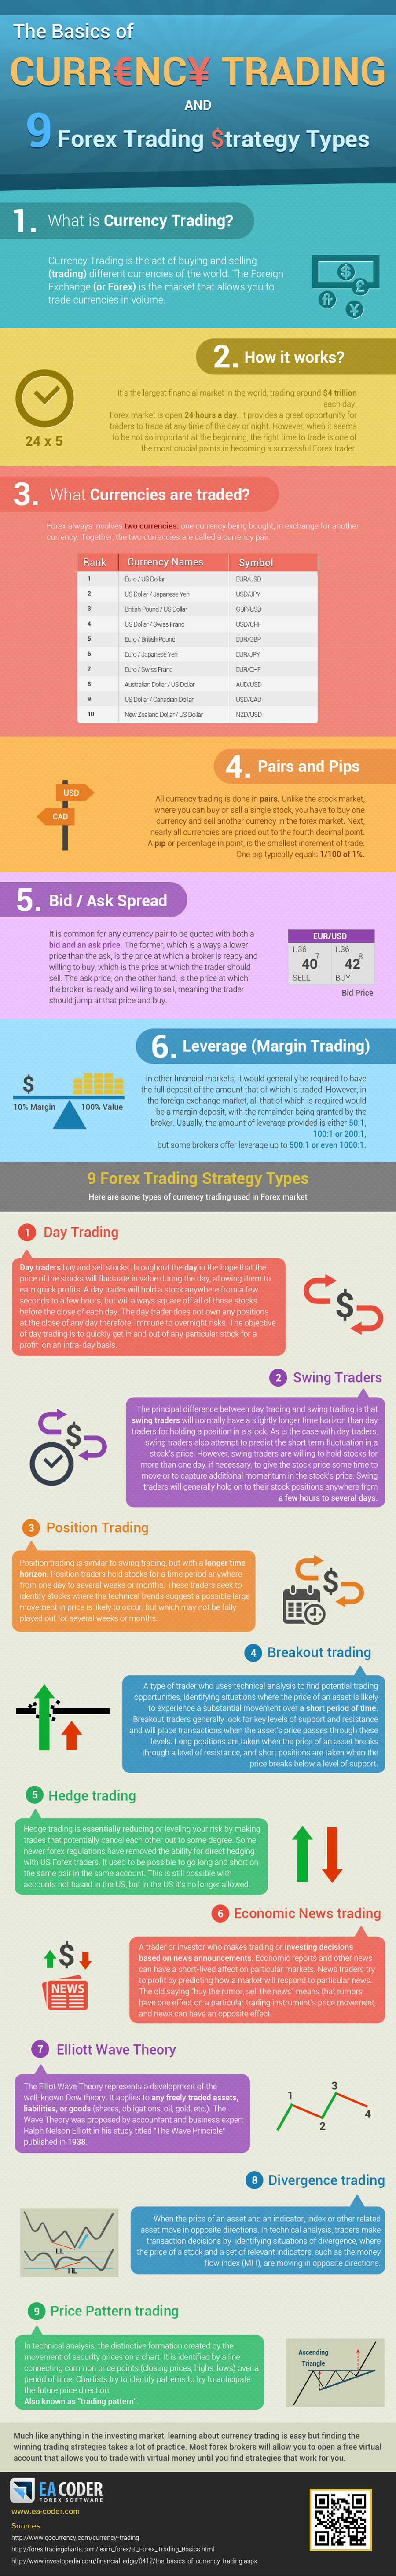 Infographic currency trading basics an 9 forex strategy types